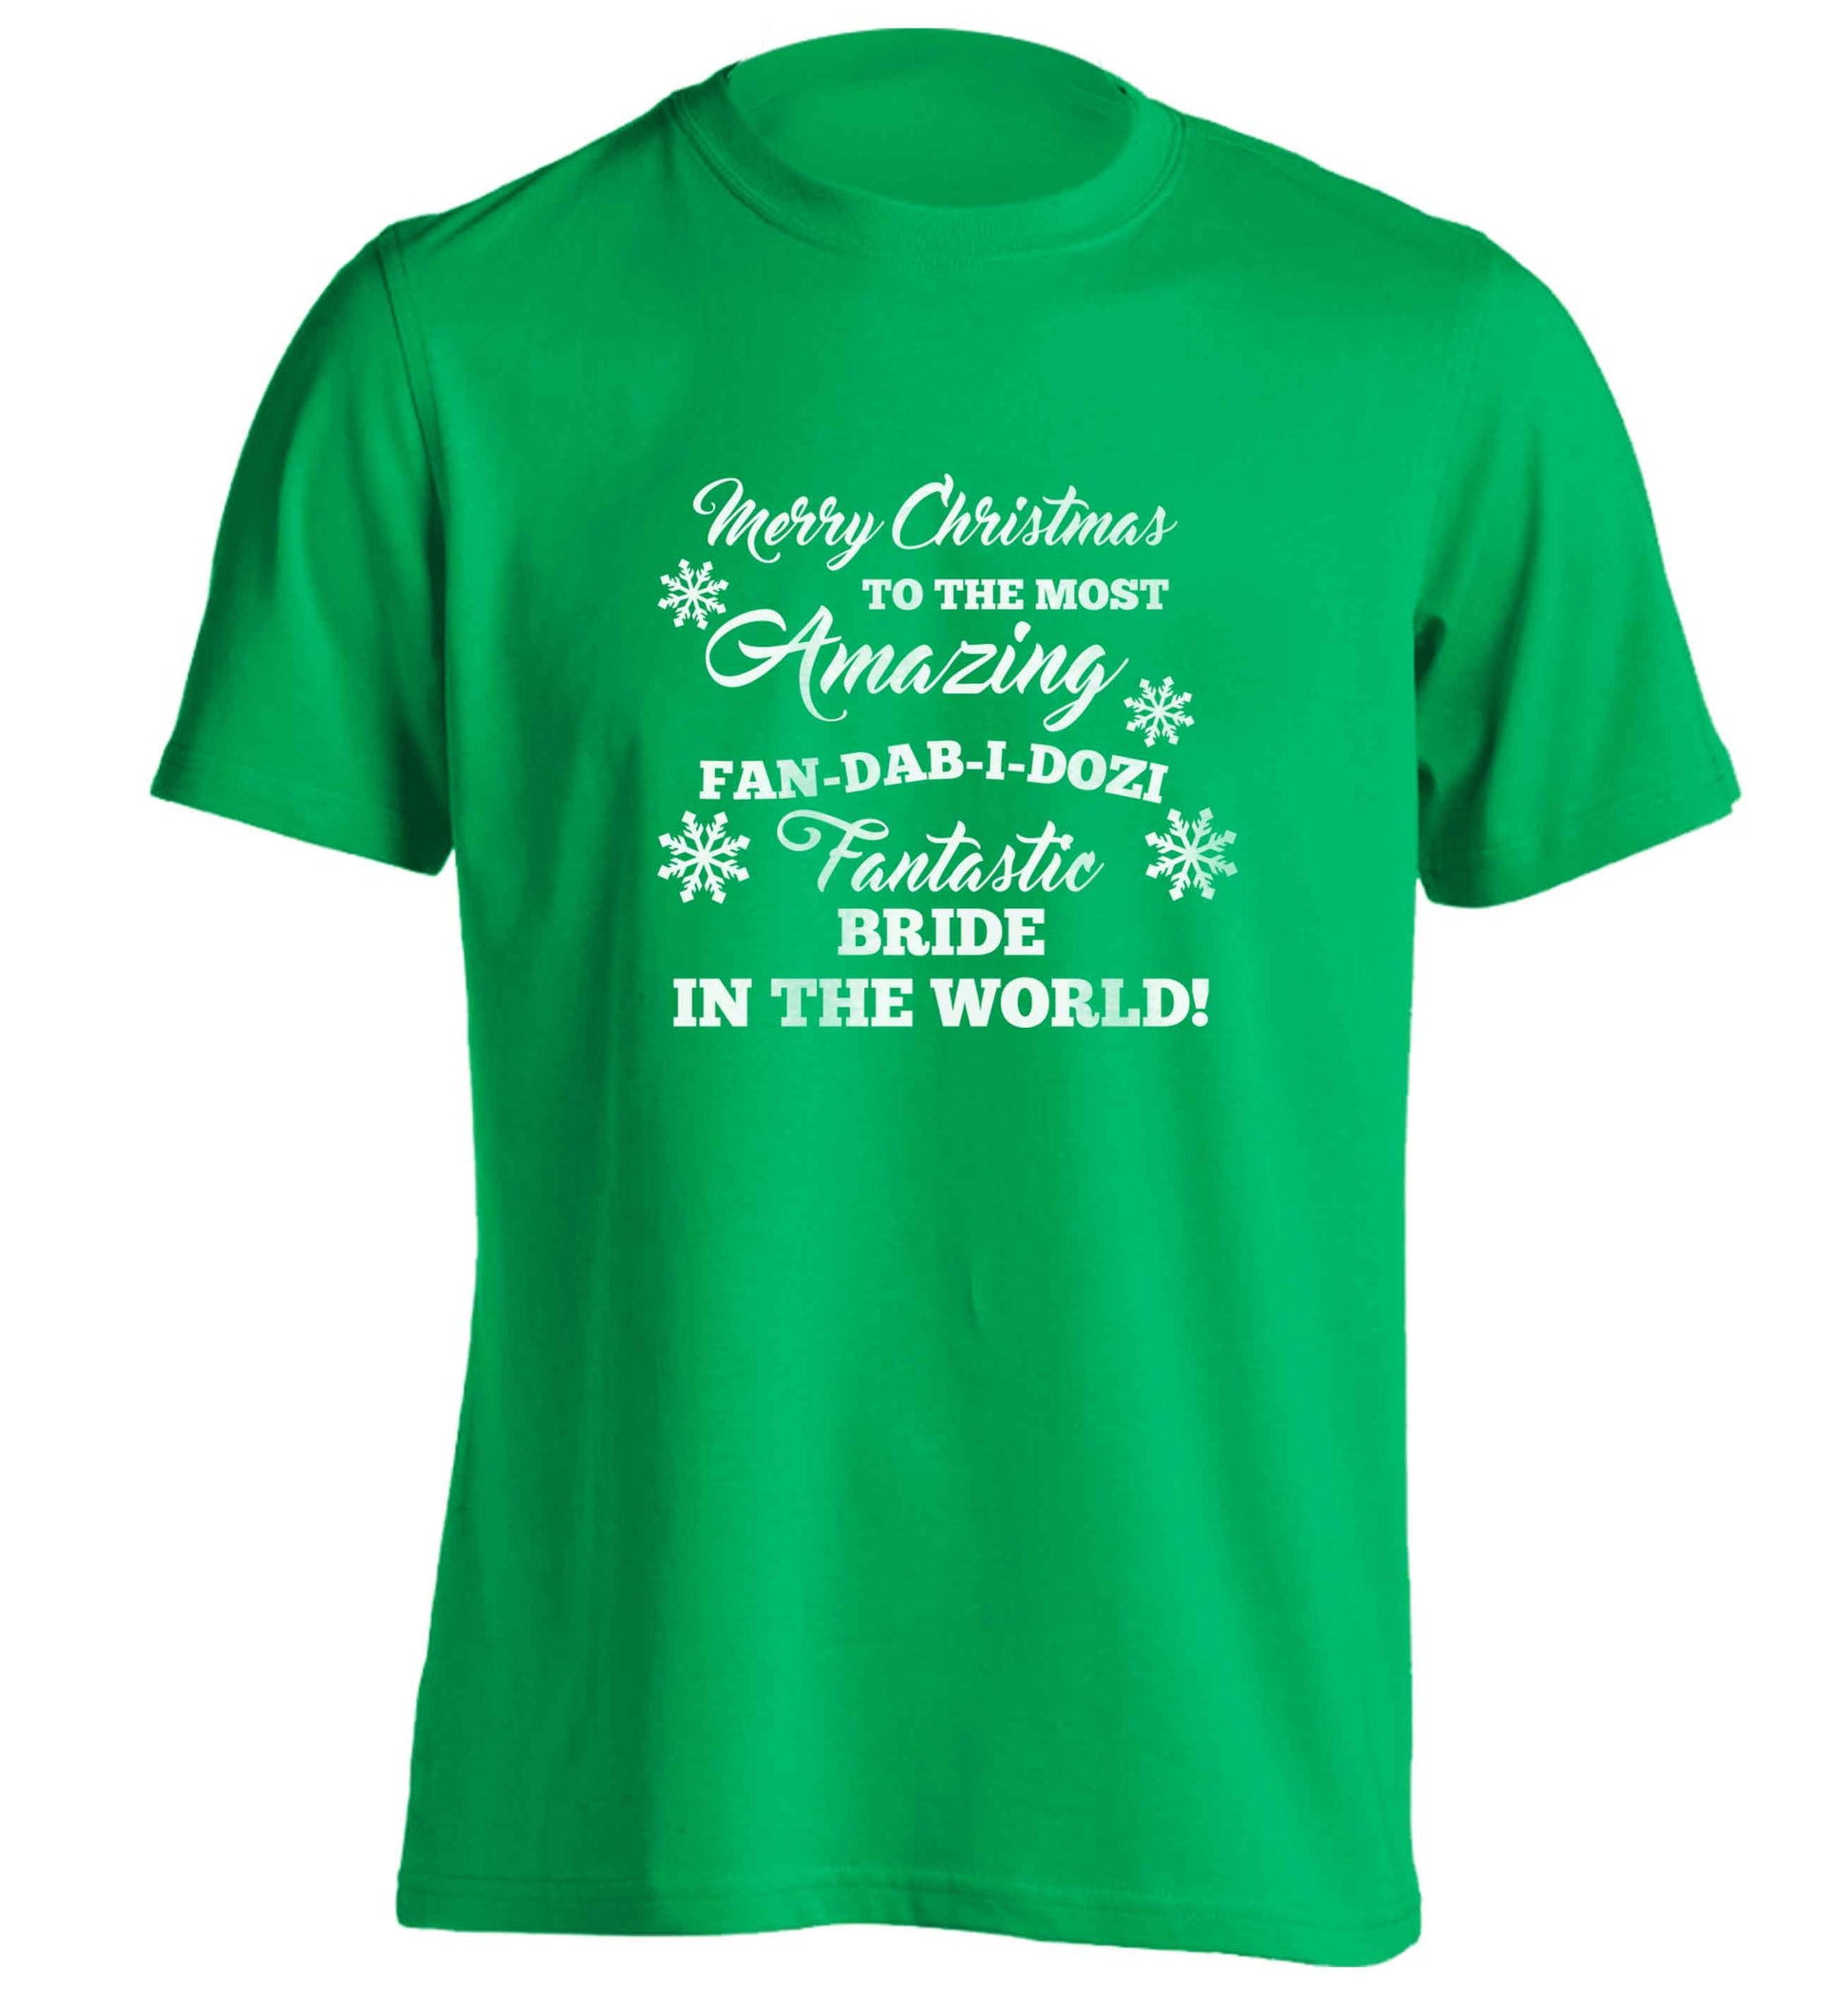 Merry Christmas to the most amazing bride in the world! adults unisex green Tshirt 2XL